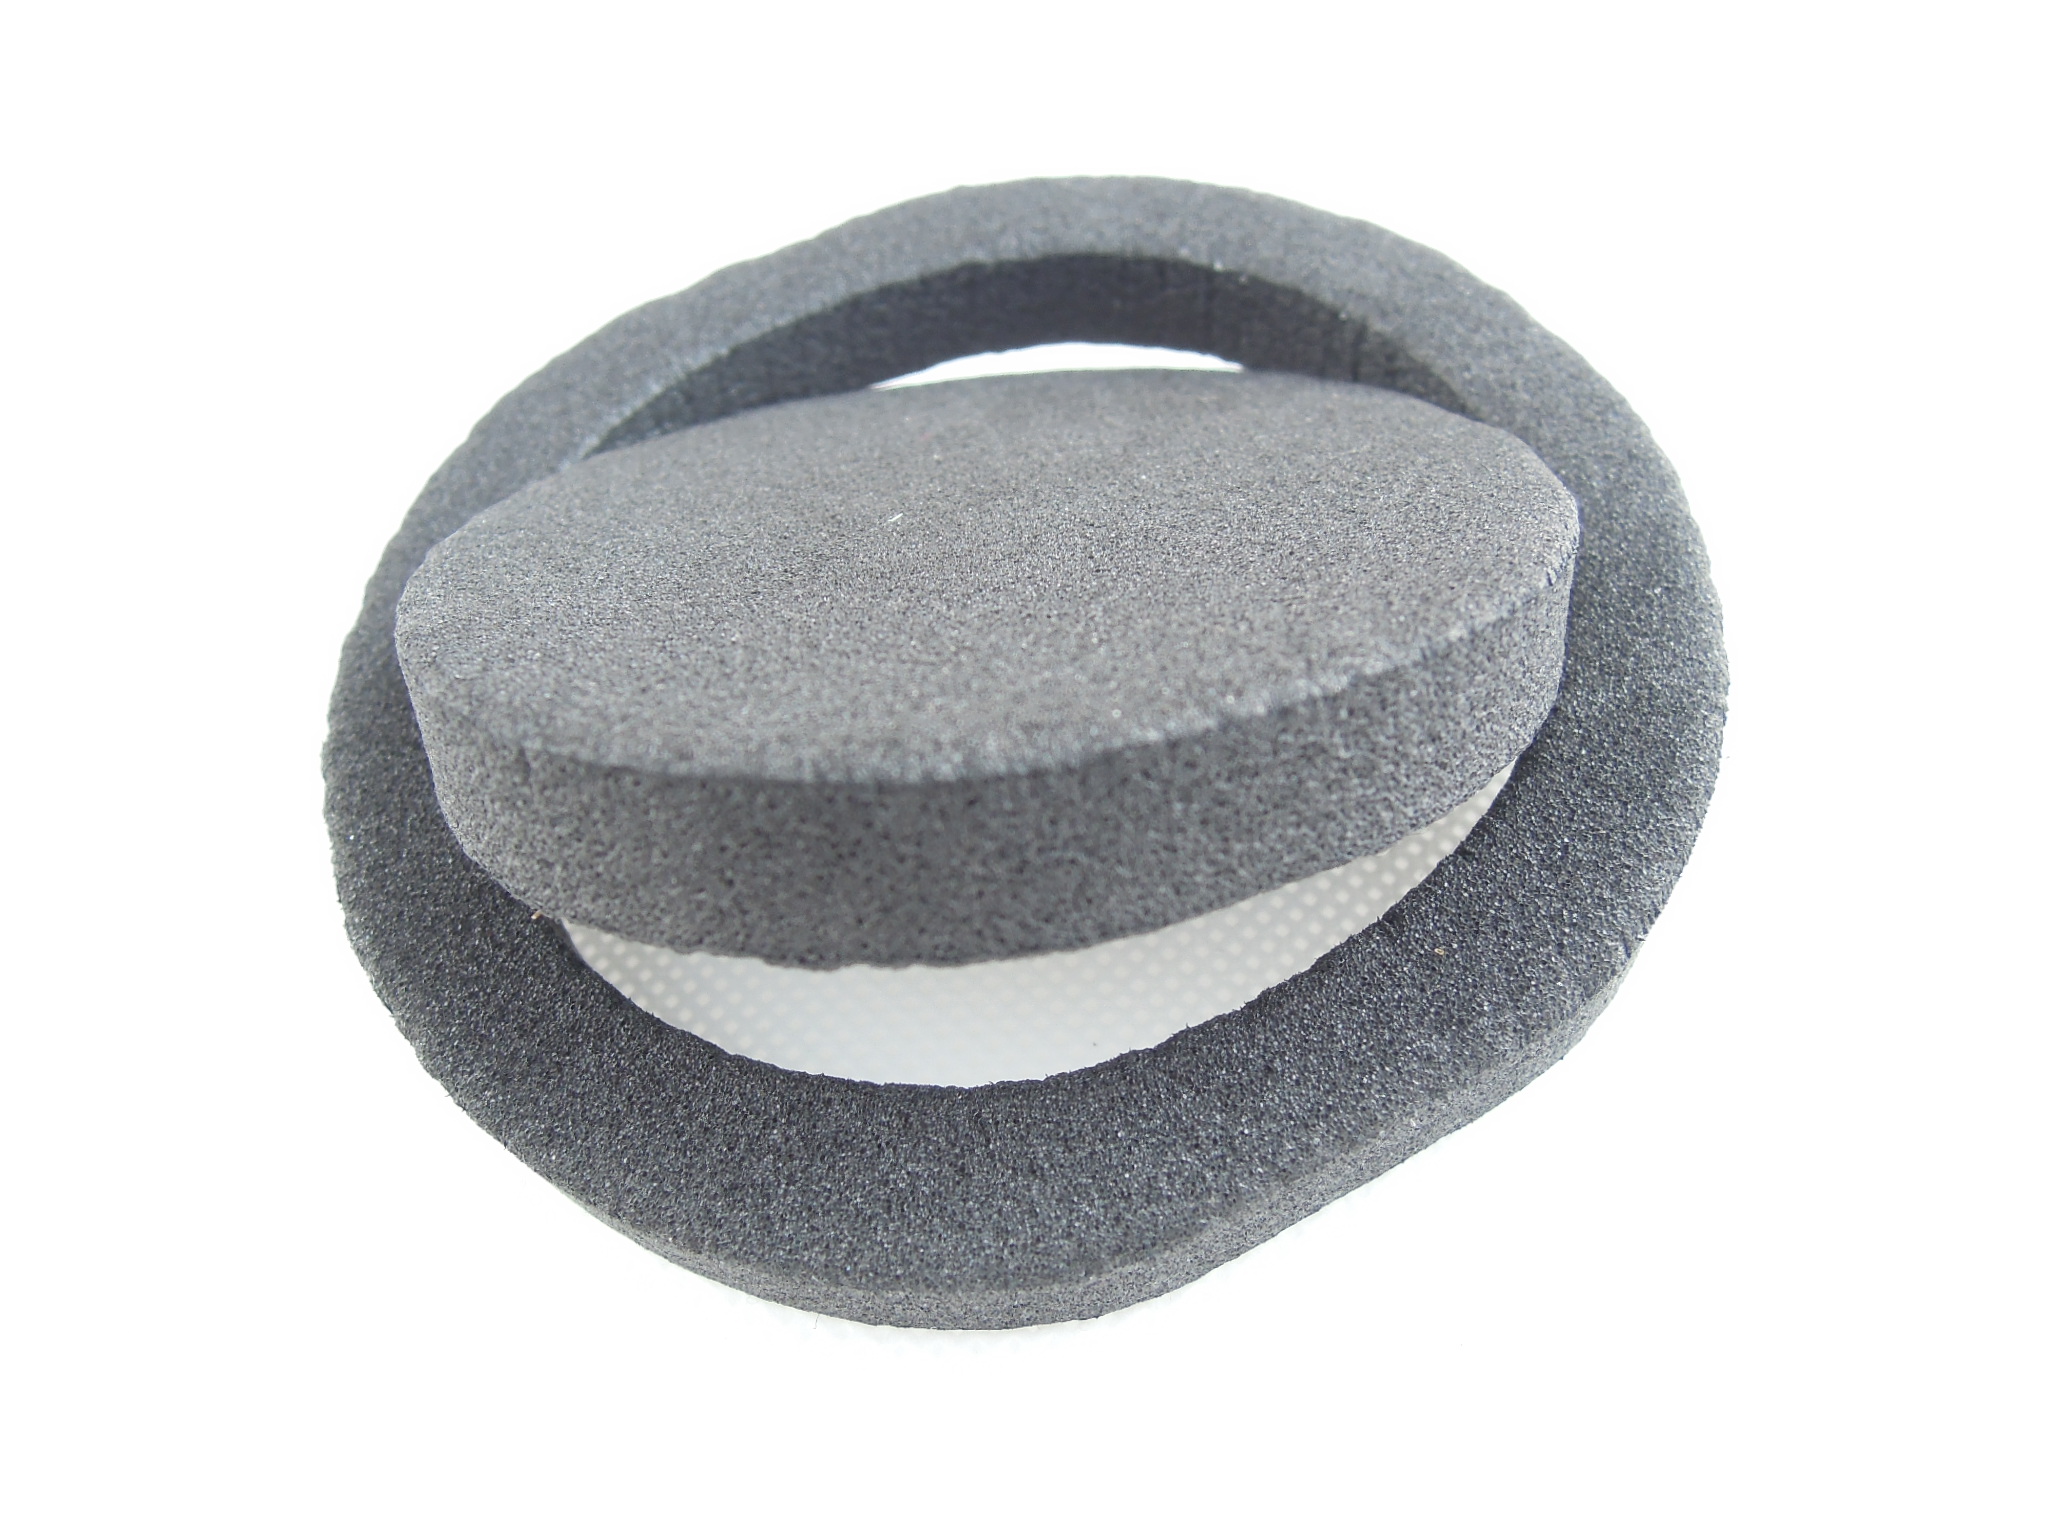 High-Quality LDPE Foam Gaskets for Sealing | Trusted Factory Manufacturer